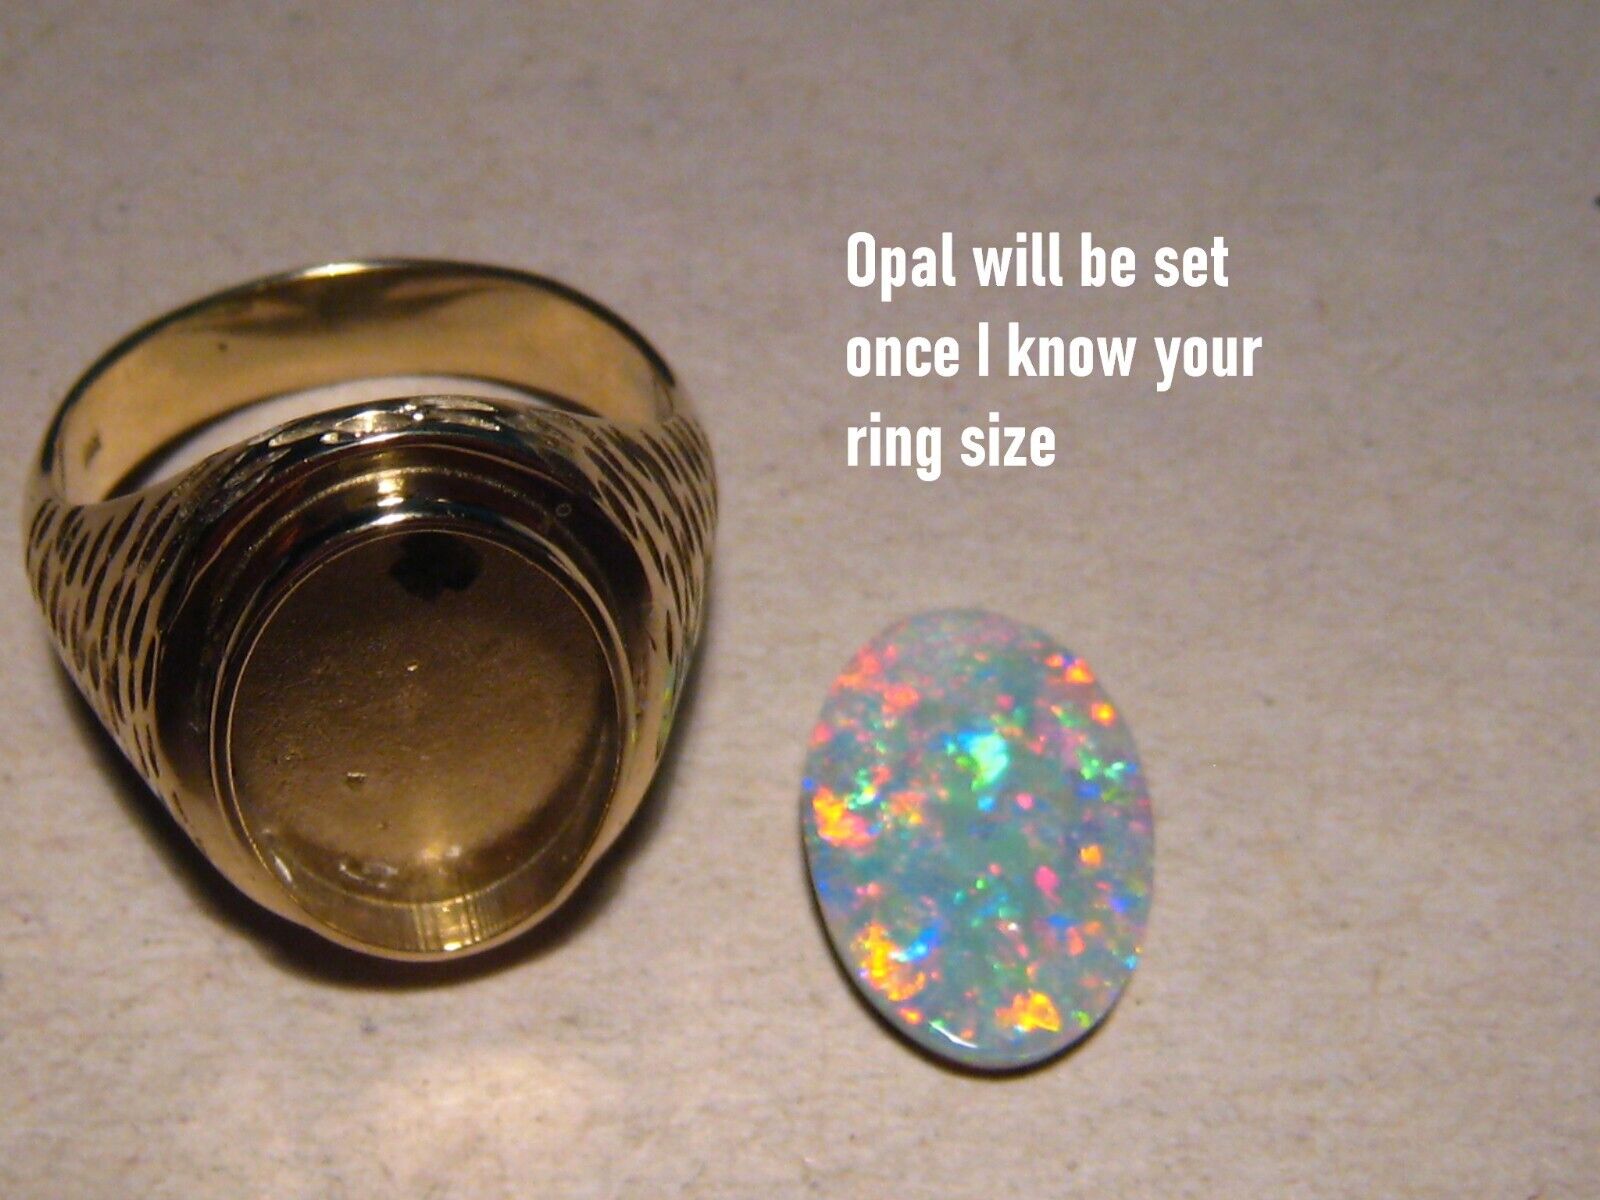 Large Men's Opal Ring -- 13 grams of solid 14k Yellow Gold | eBay